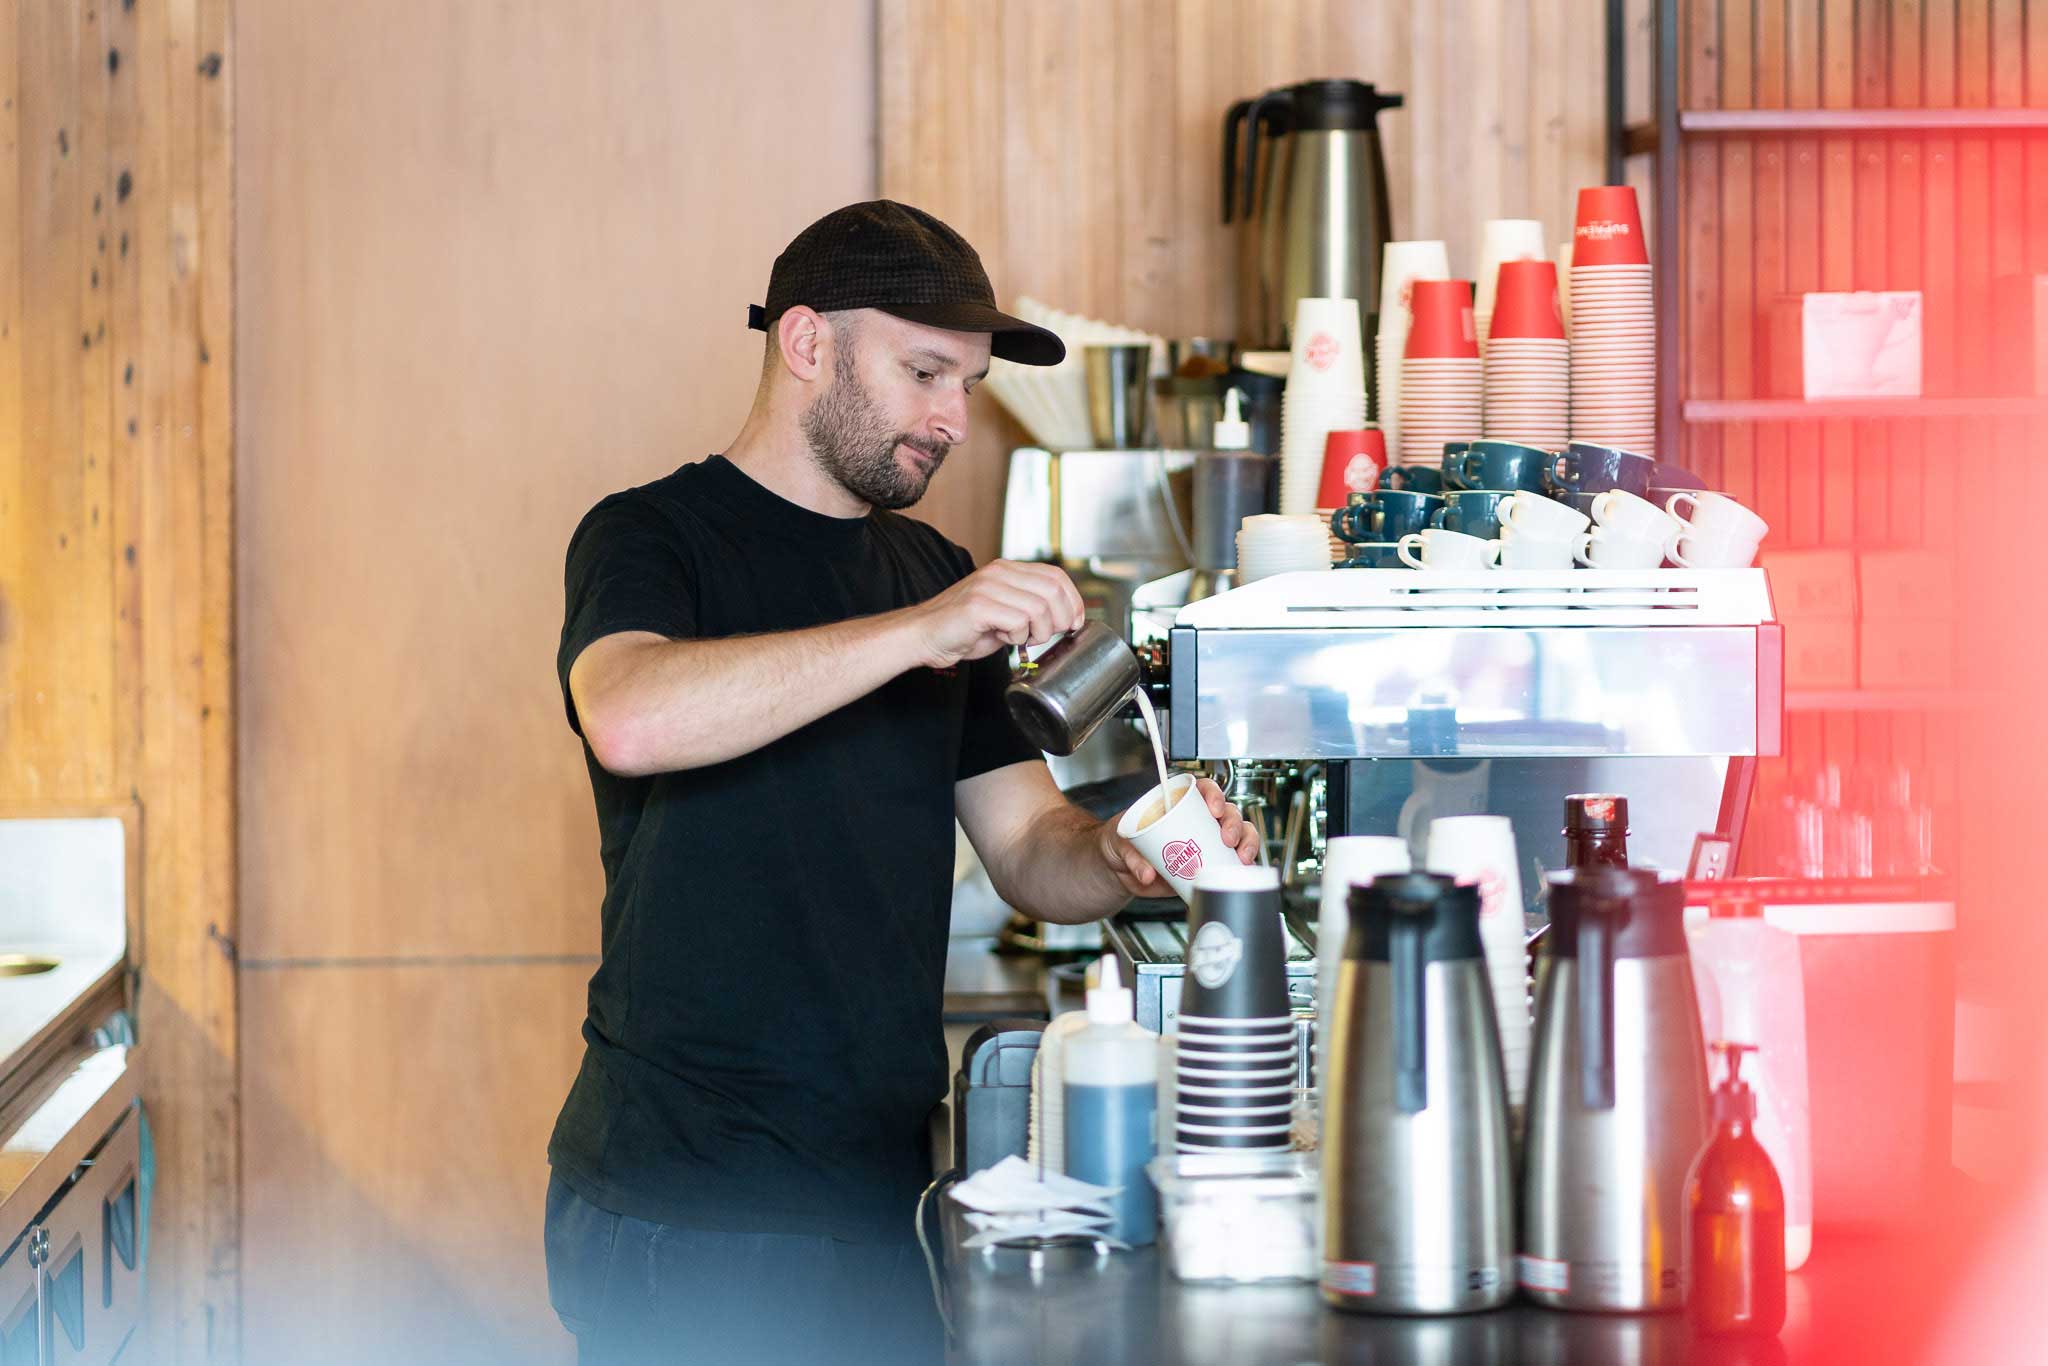 Tim pouring coffee at Customs.